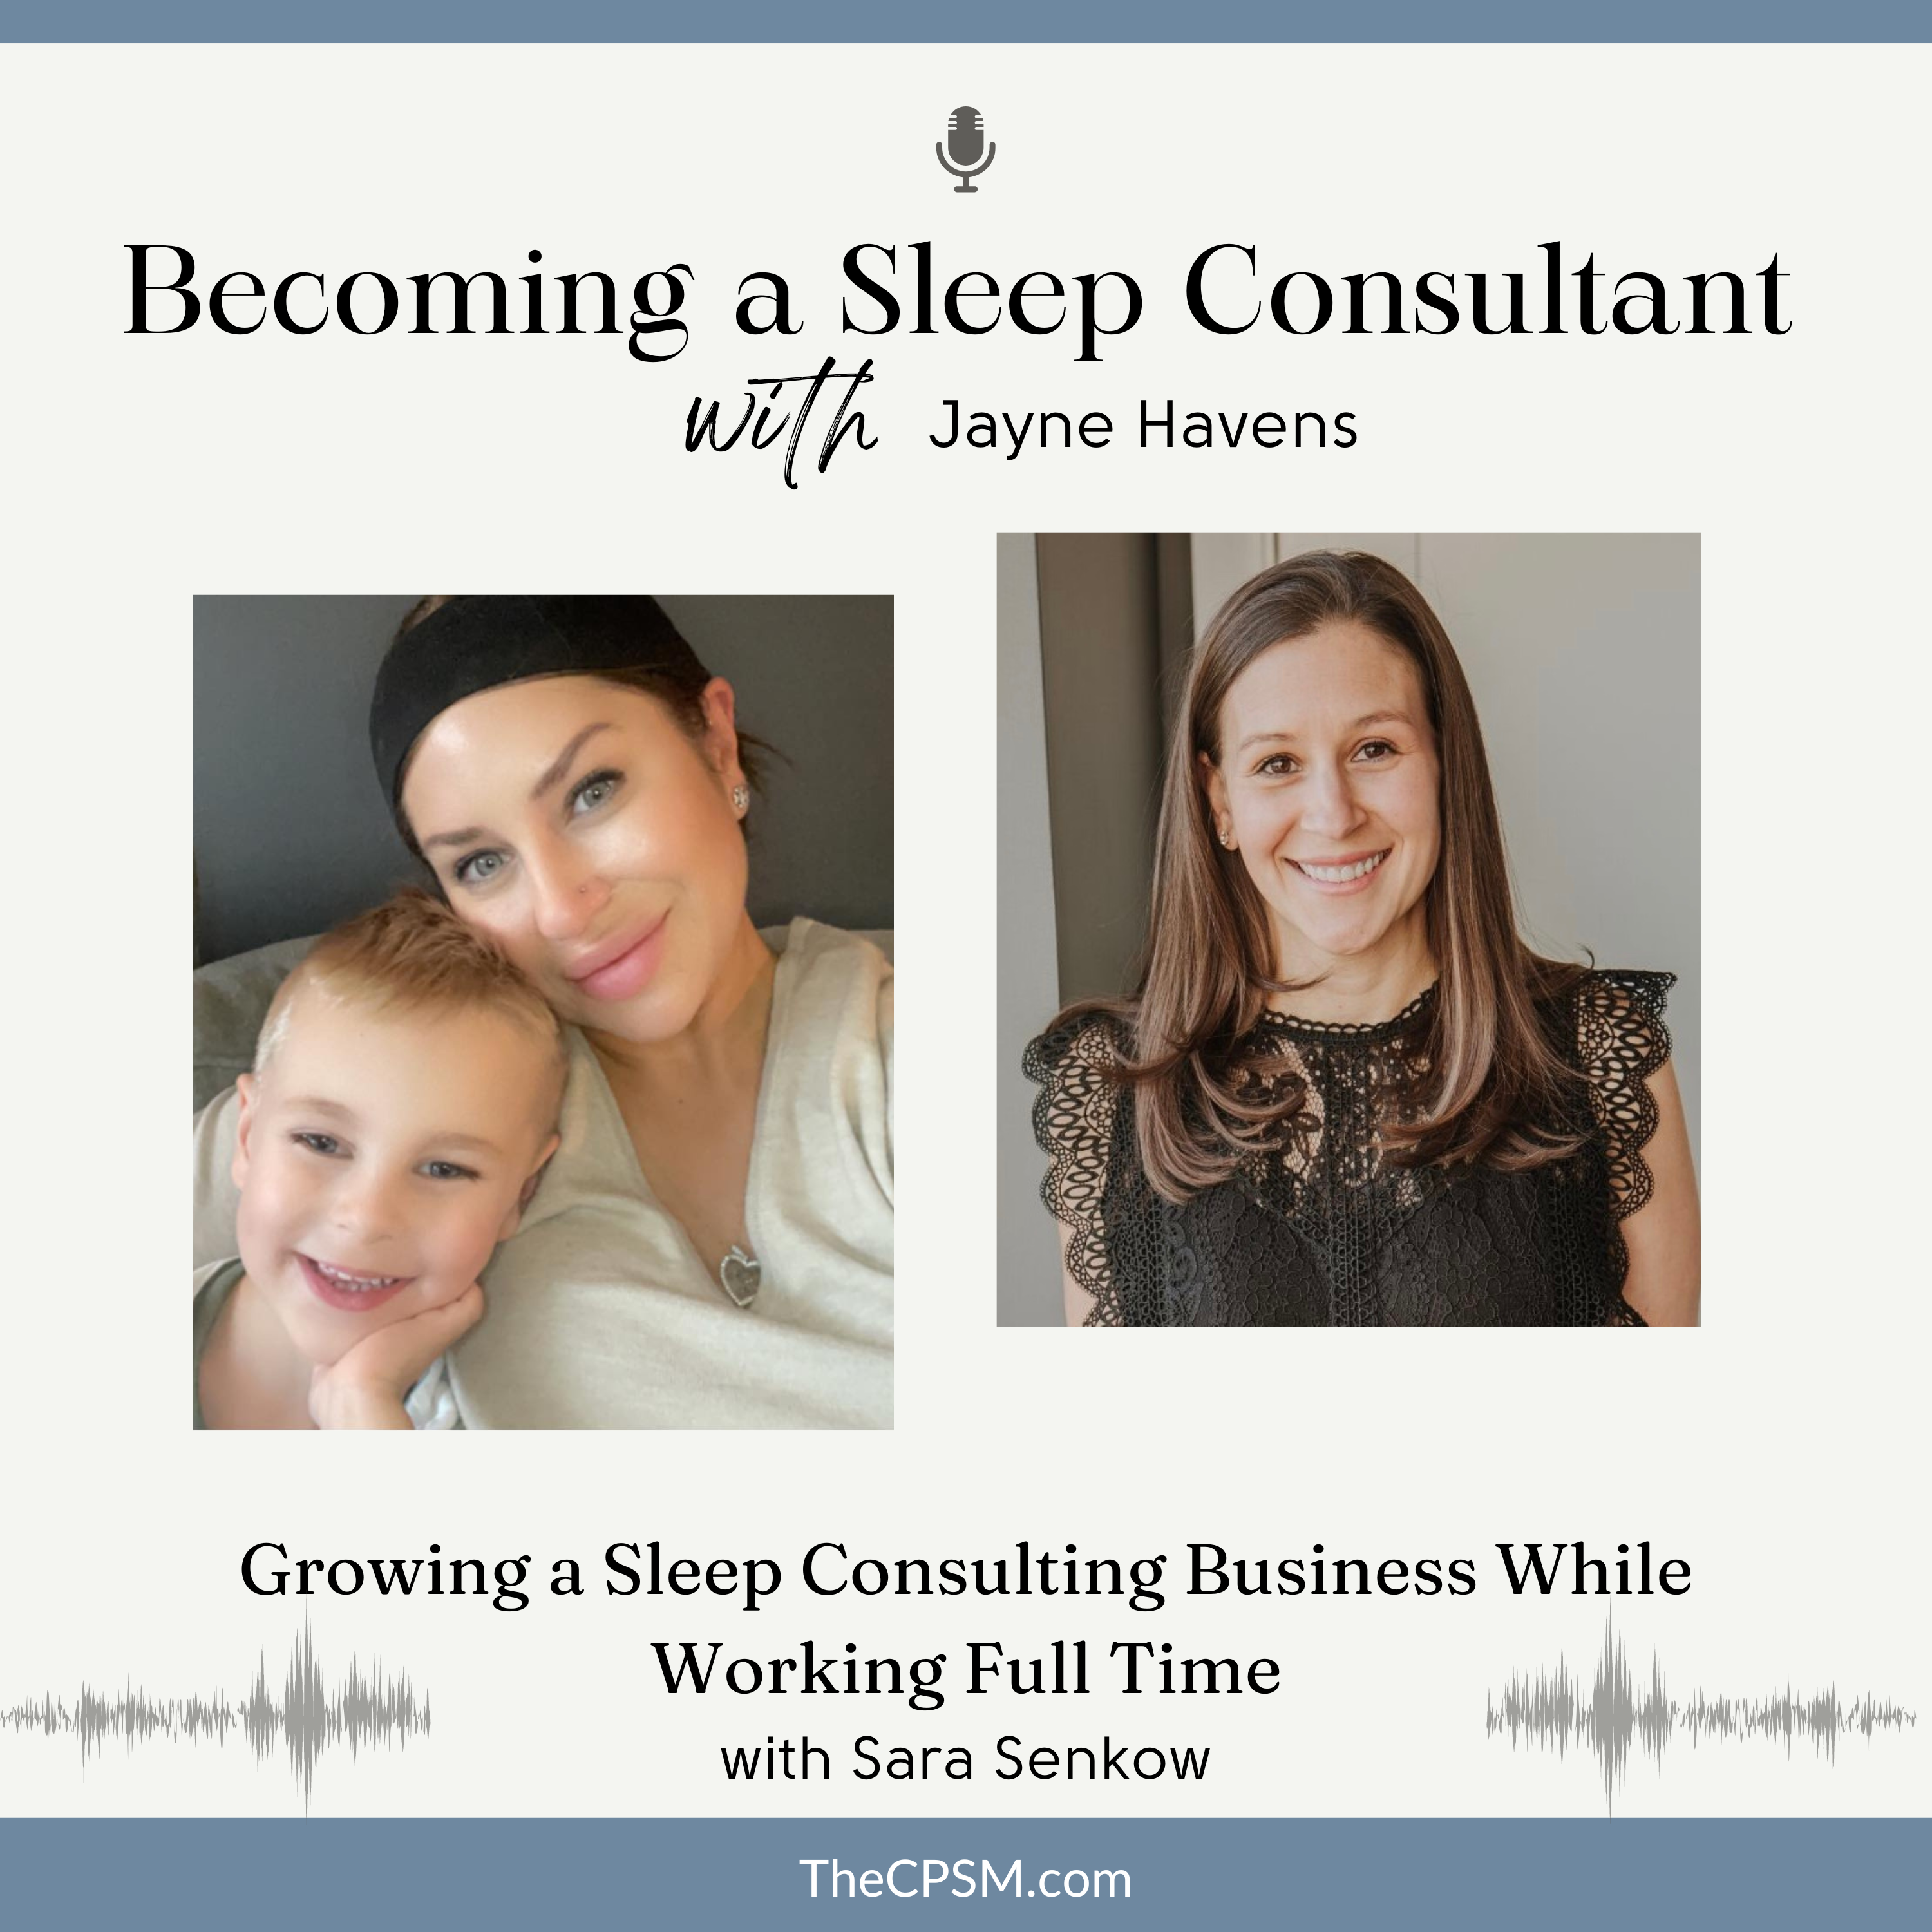 Growing a Sleep Consulting Business While Working Full Time with Sara Senkow